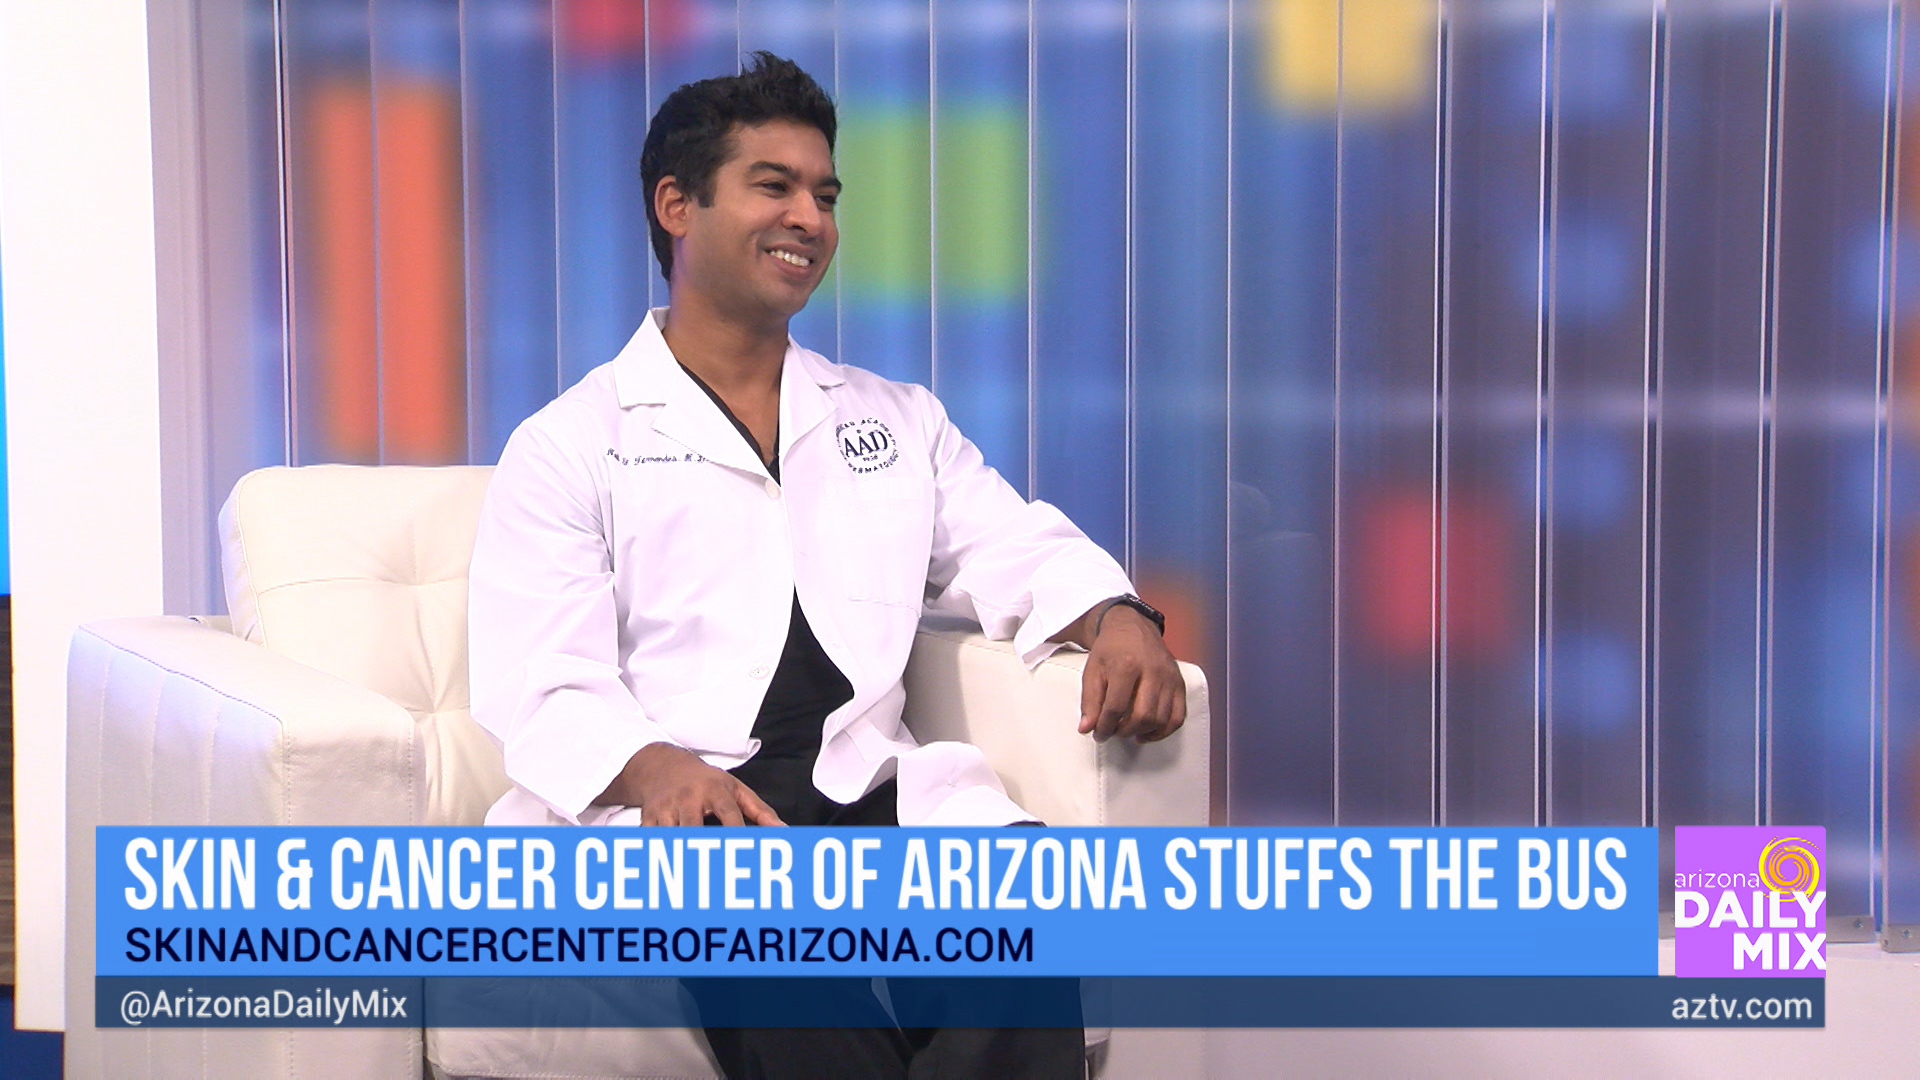 Skin & Cancer Center of Arizona is Helping to Stuff the Bus in 2021!